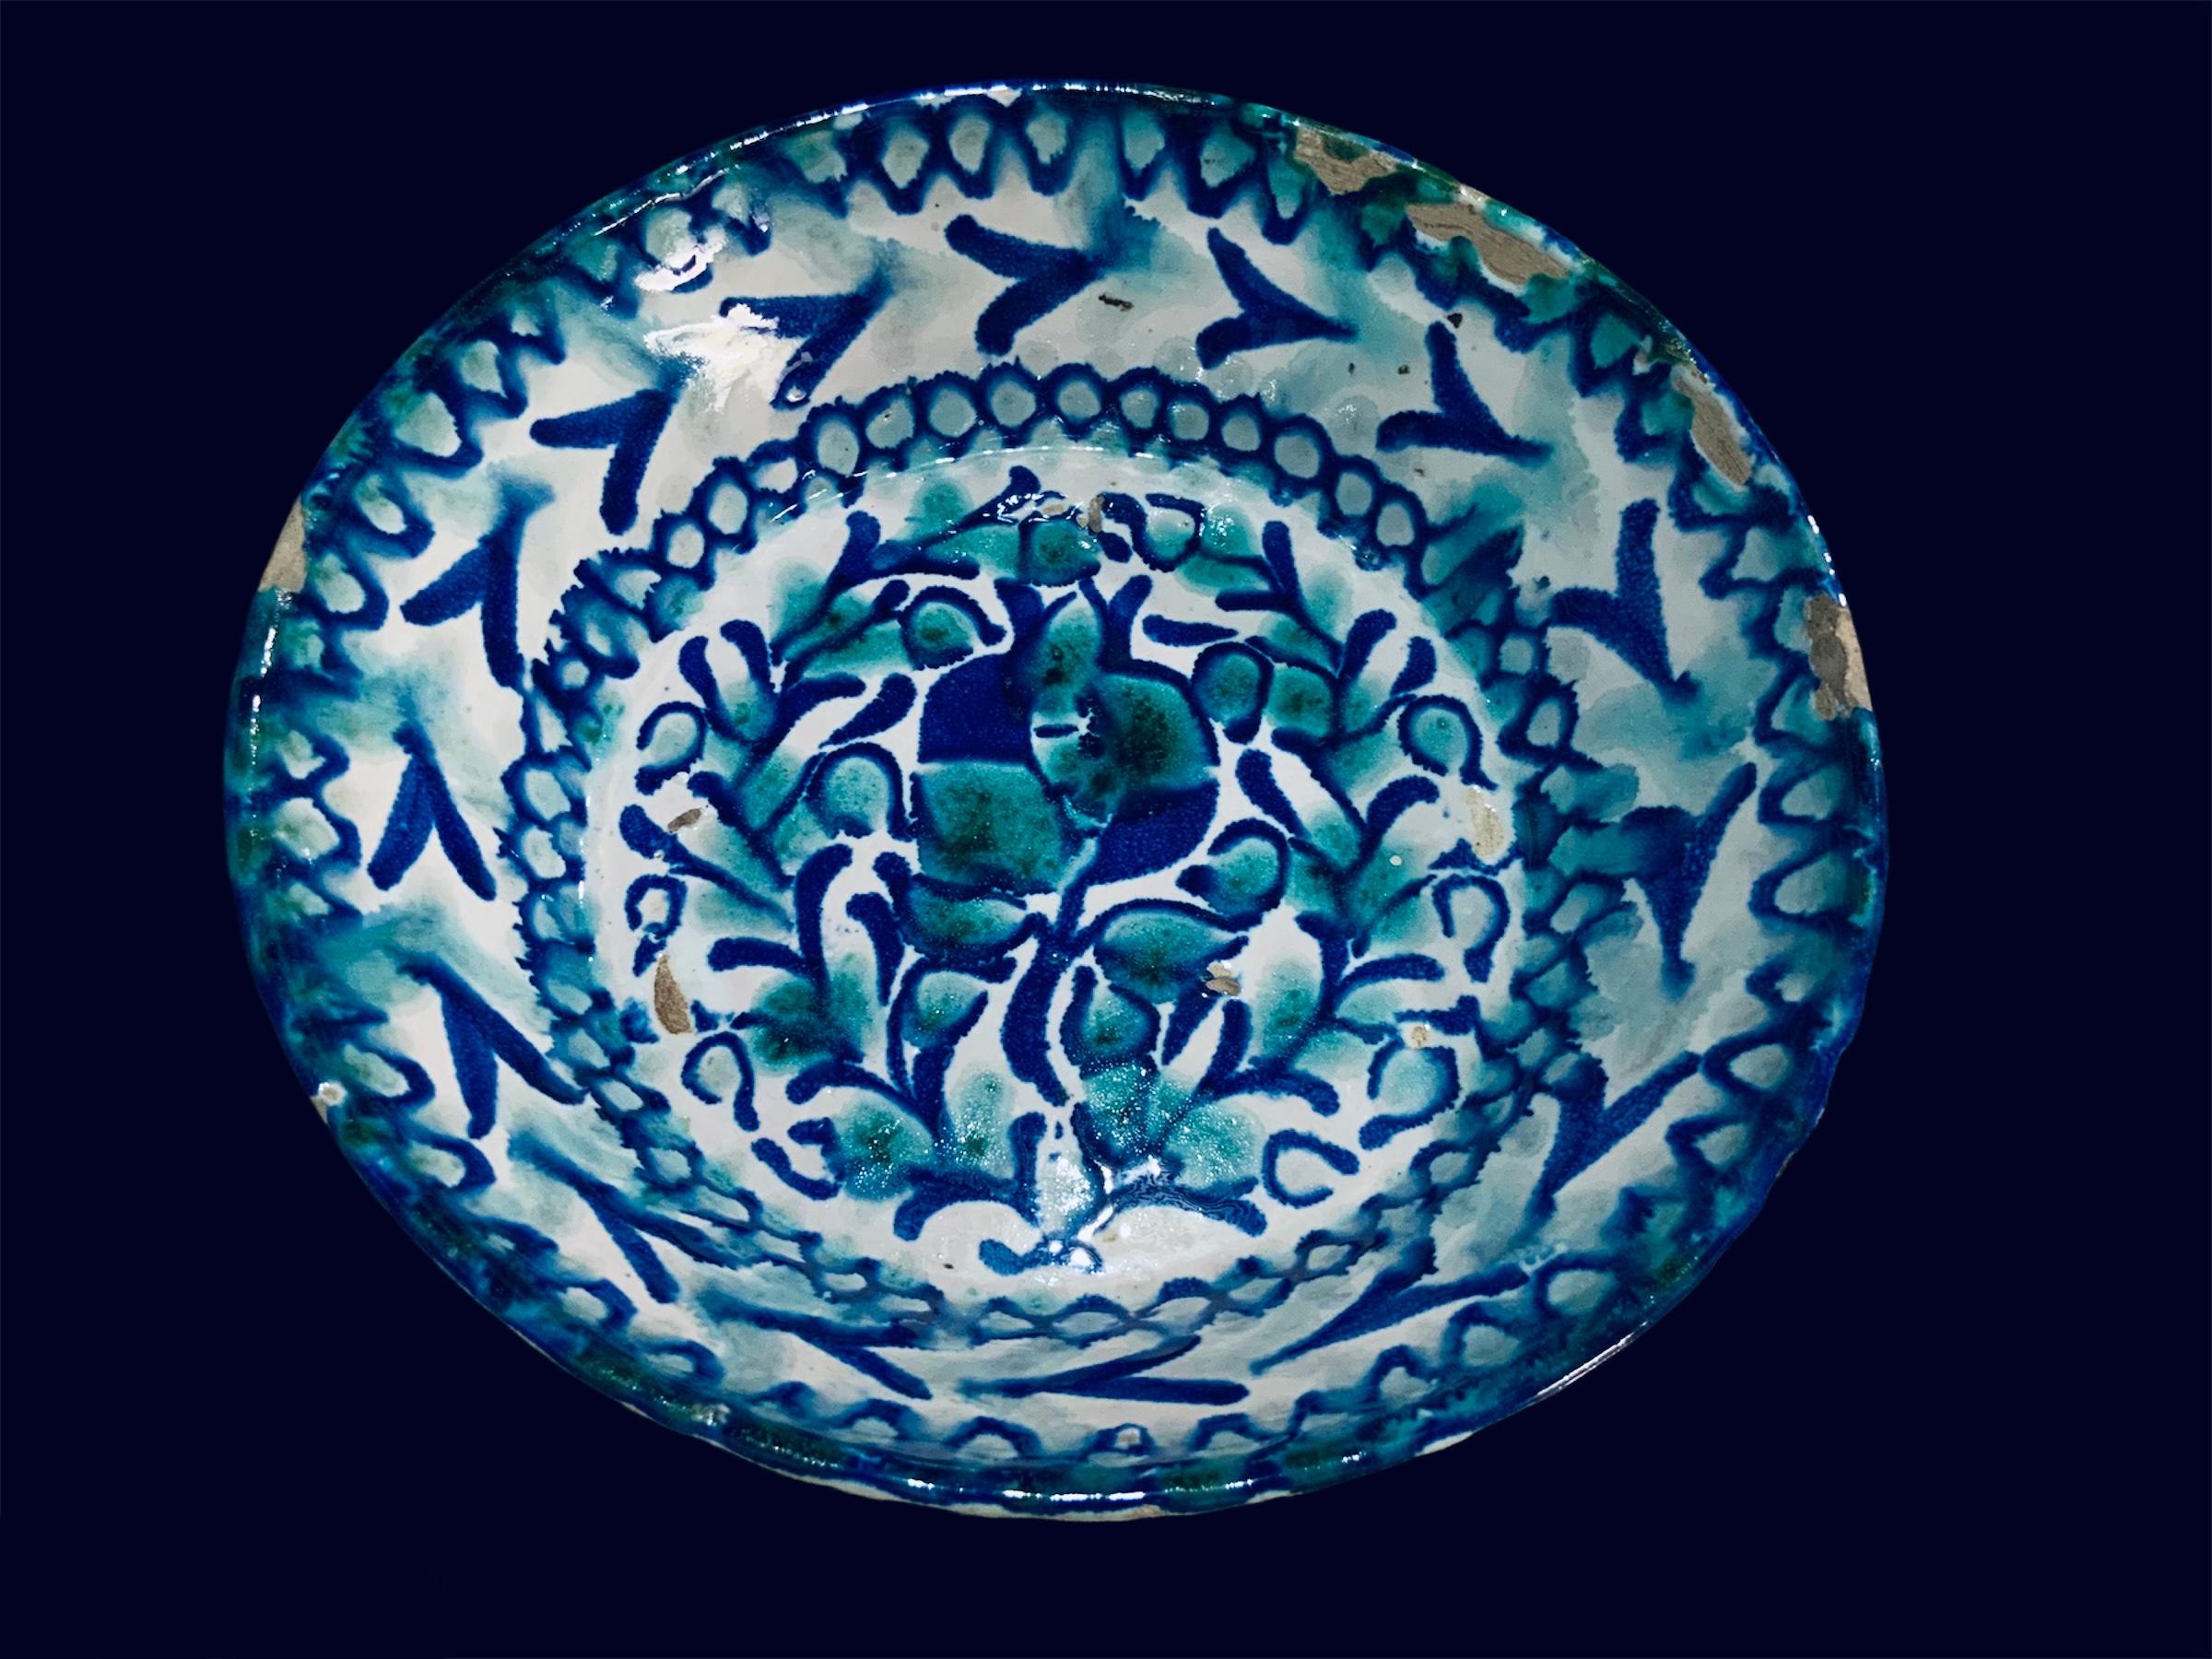 This is a Fajalauza style ceramic bowl from Spain. It depicts a round bowl hand painted cobalt blue and green with a pomegranate flower and some branches in the center. Around this center, there is a garland of circles and above them, some goose